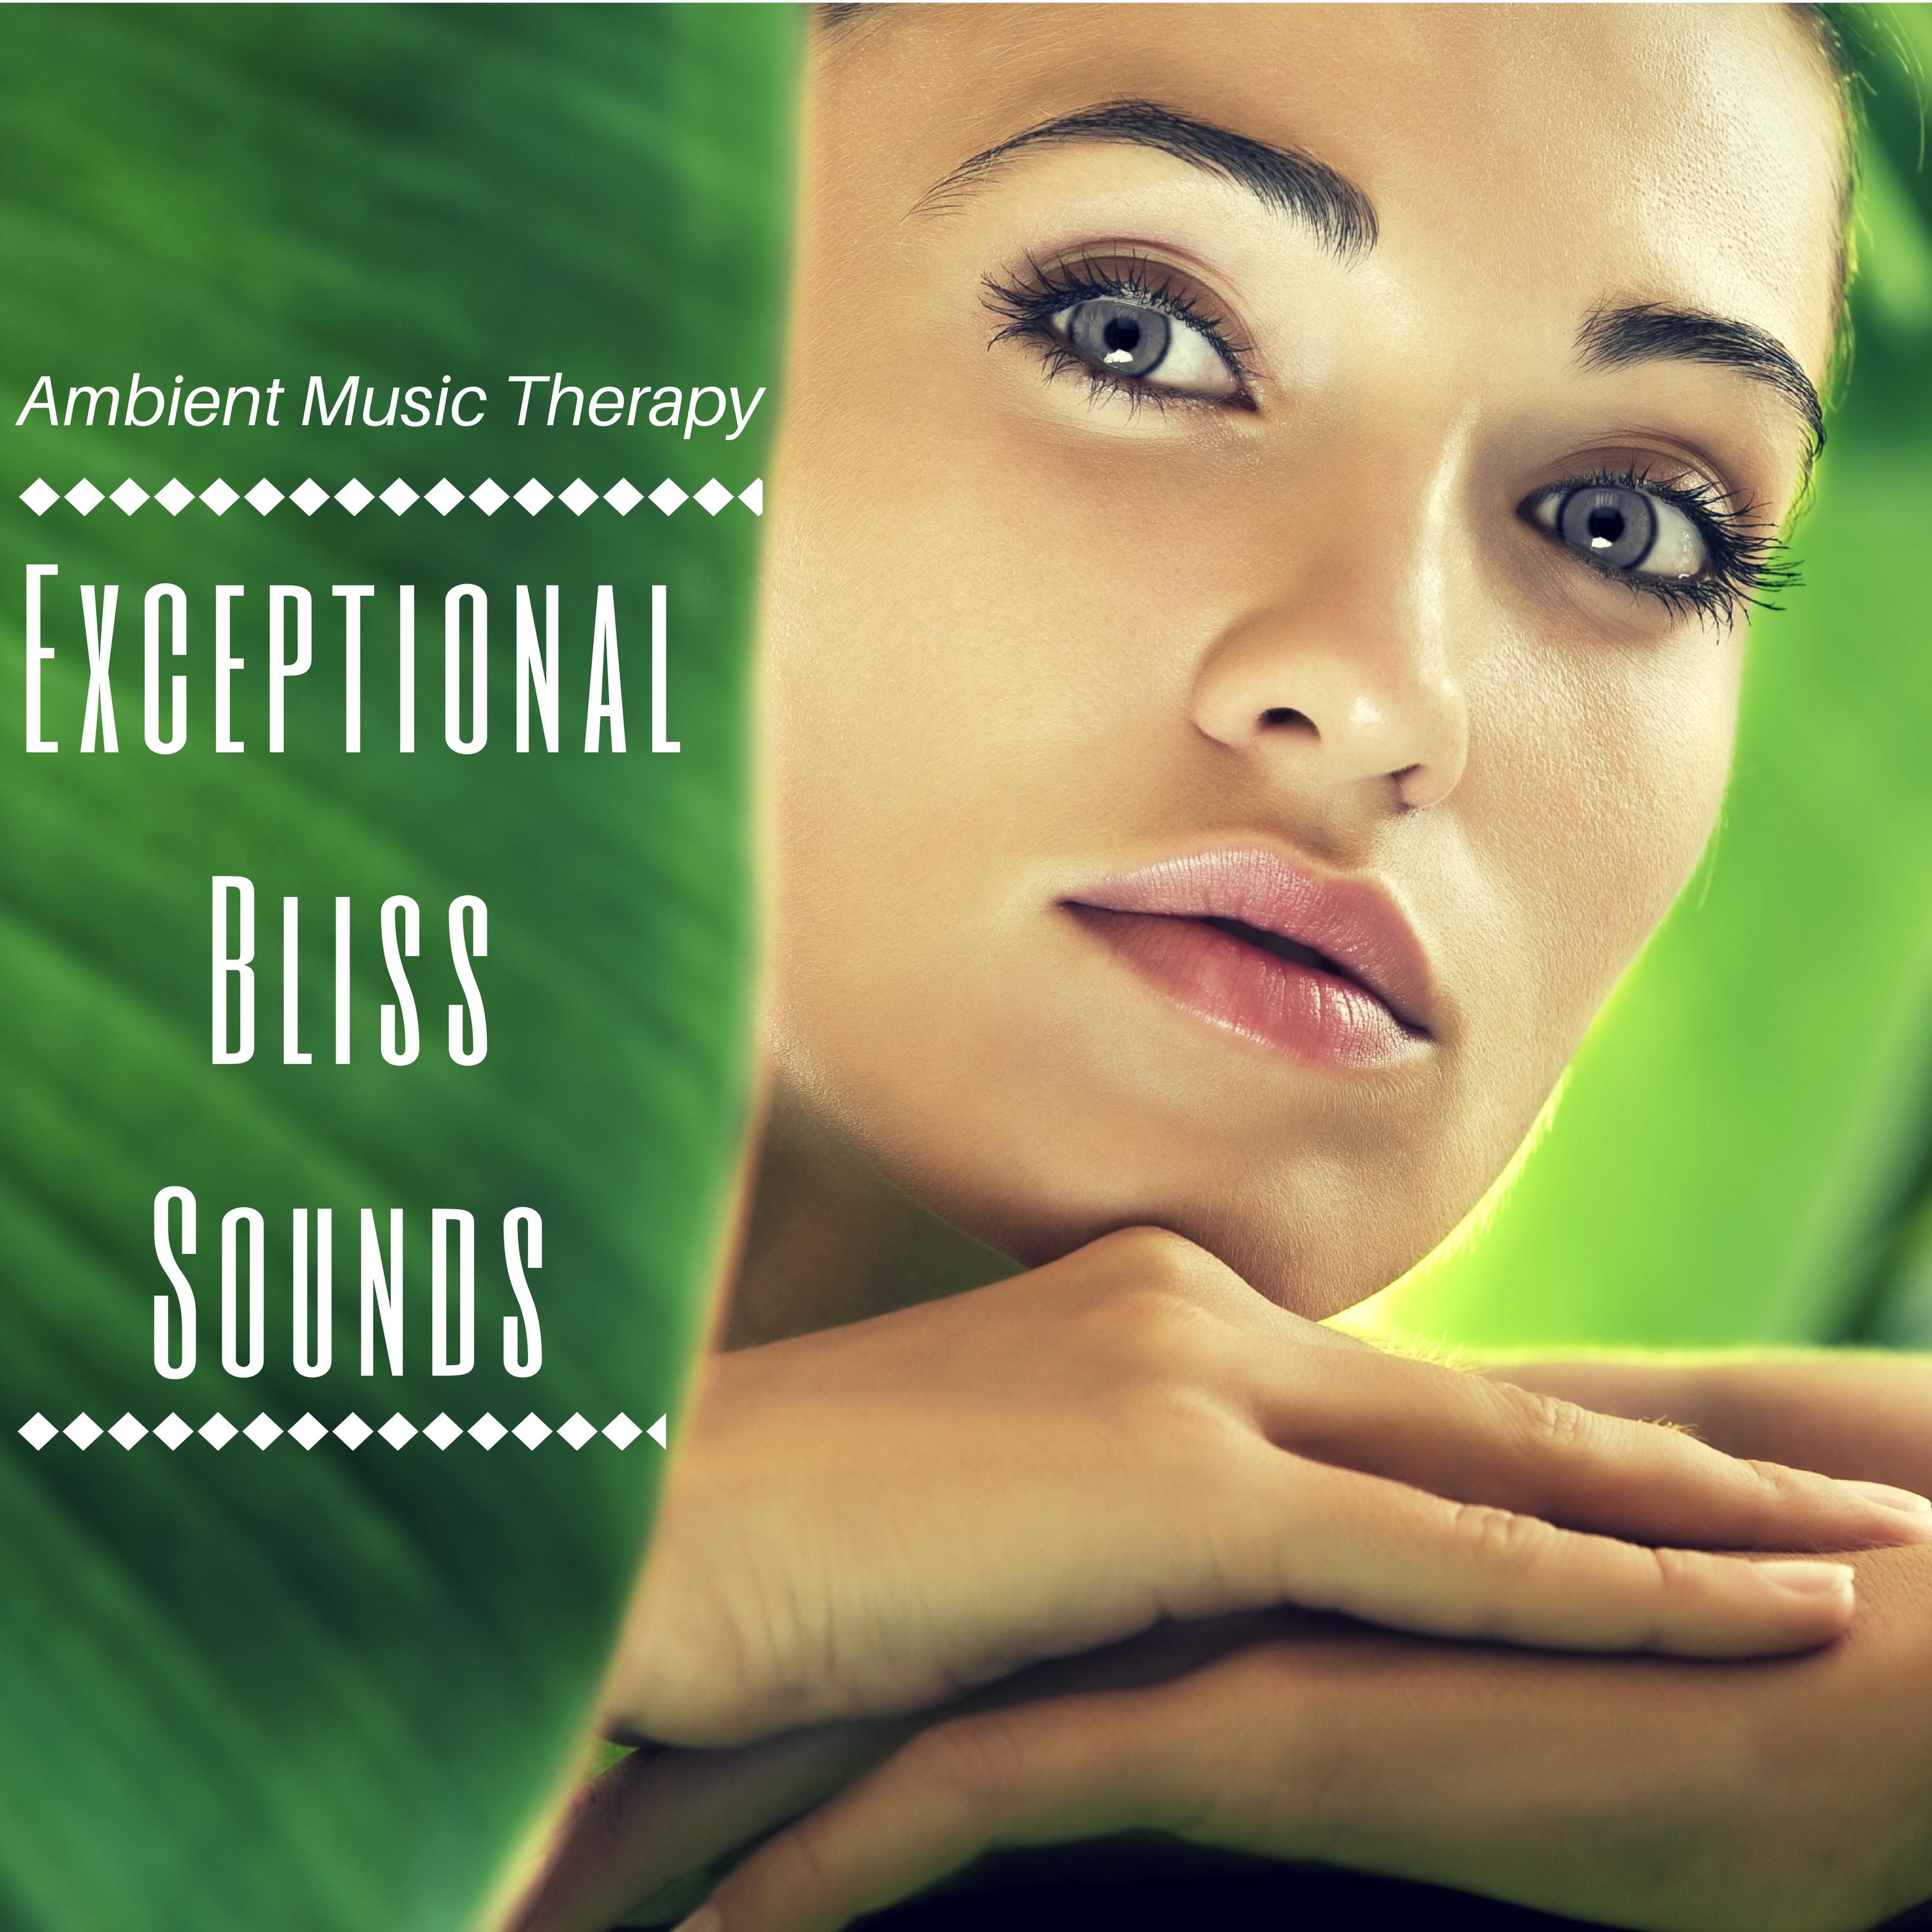 Exceptional Bliss Sounds